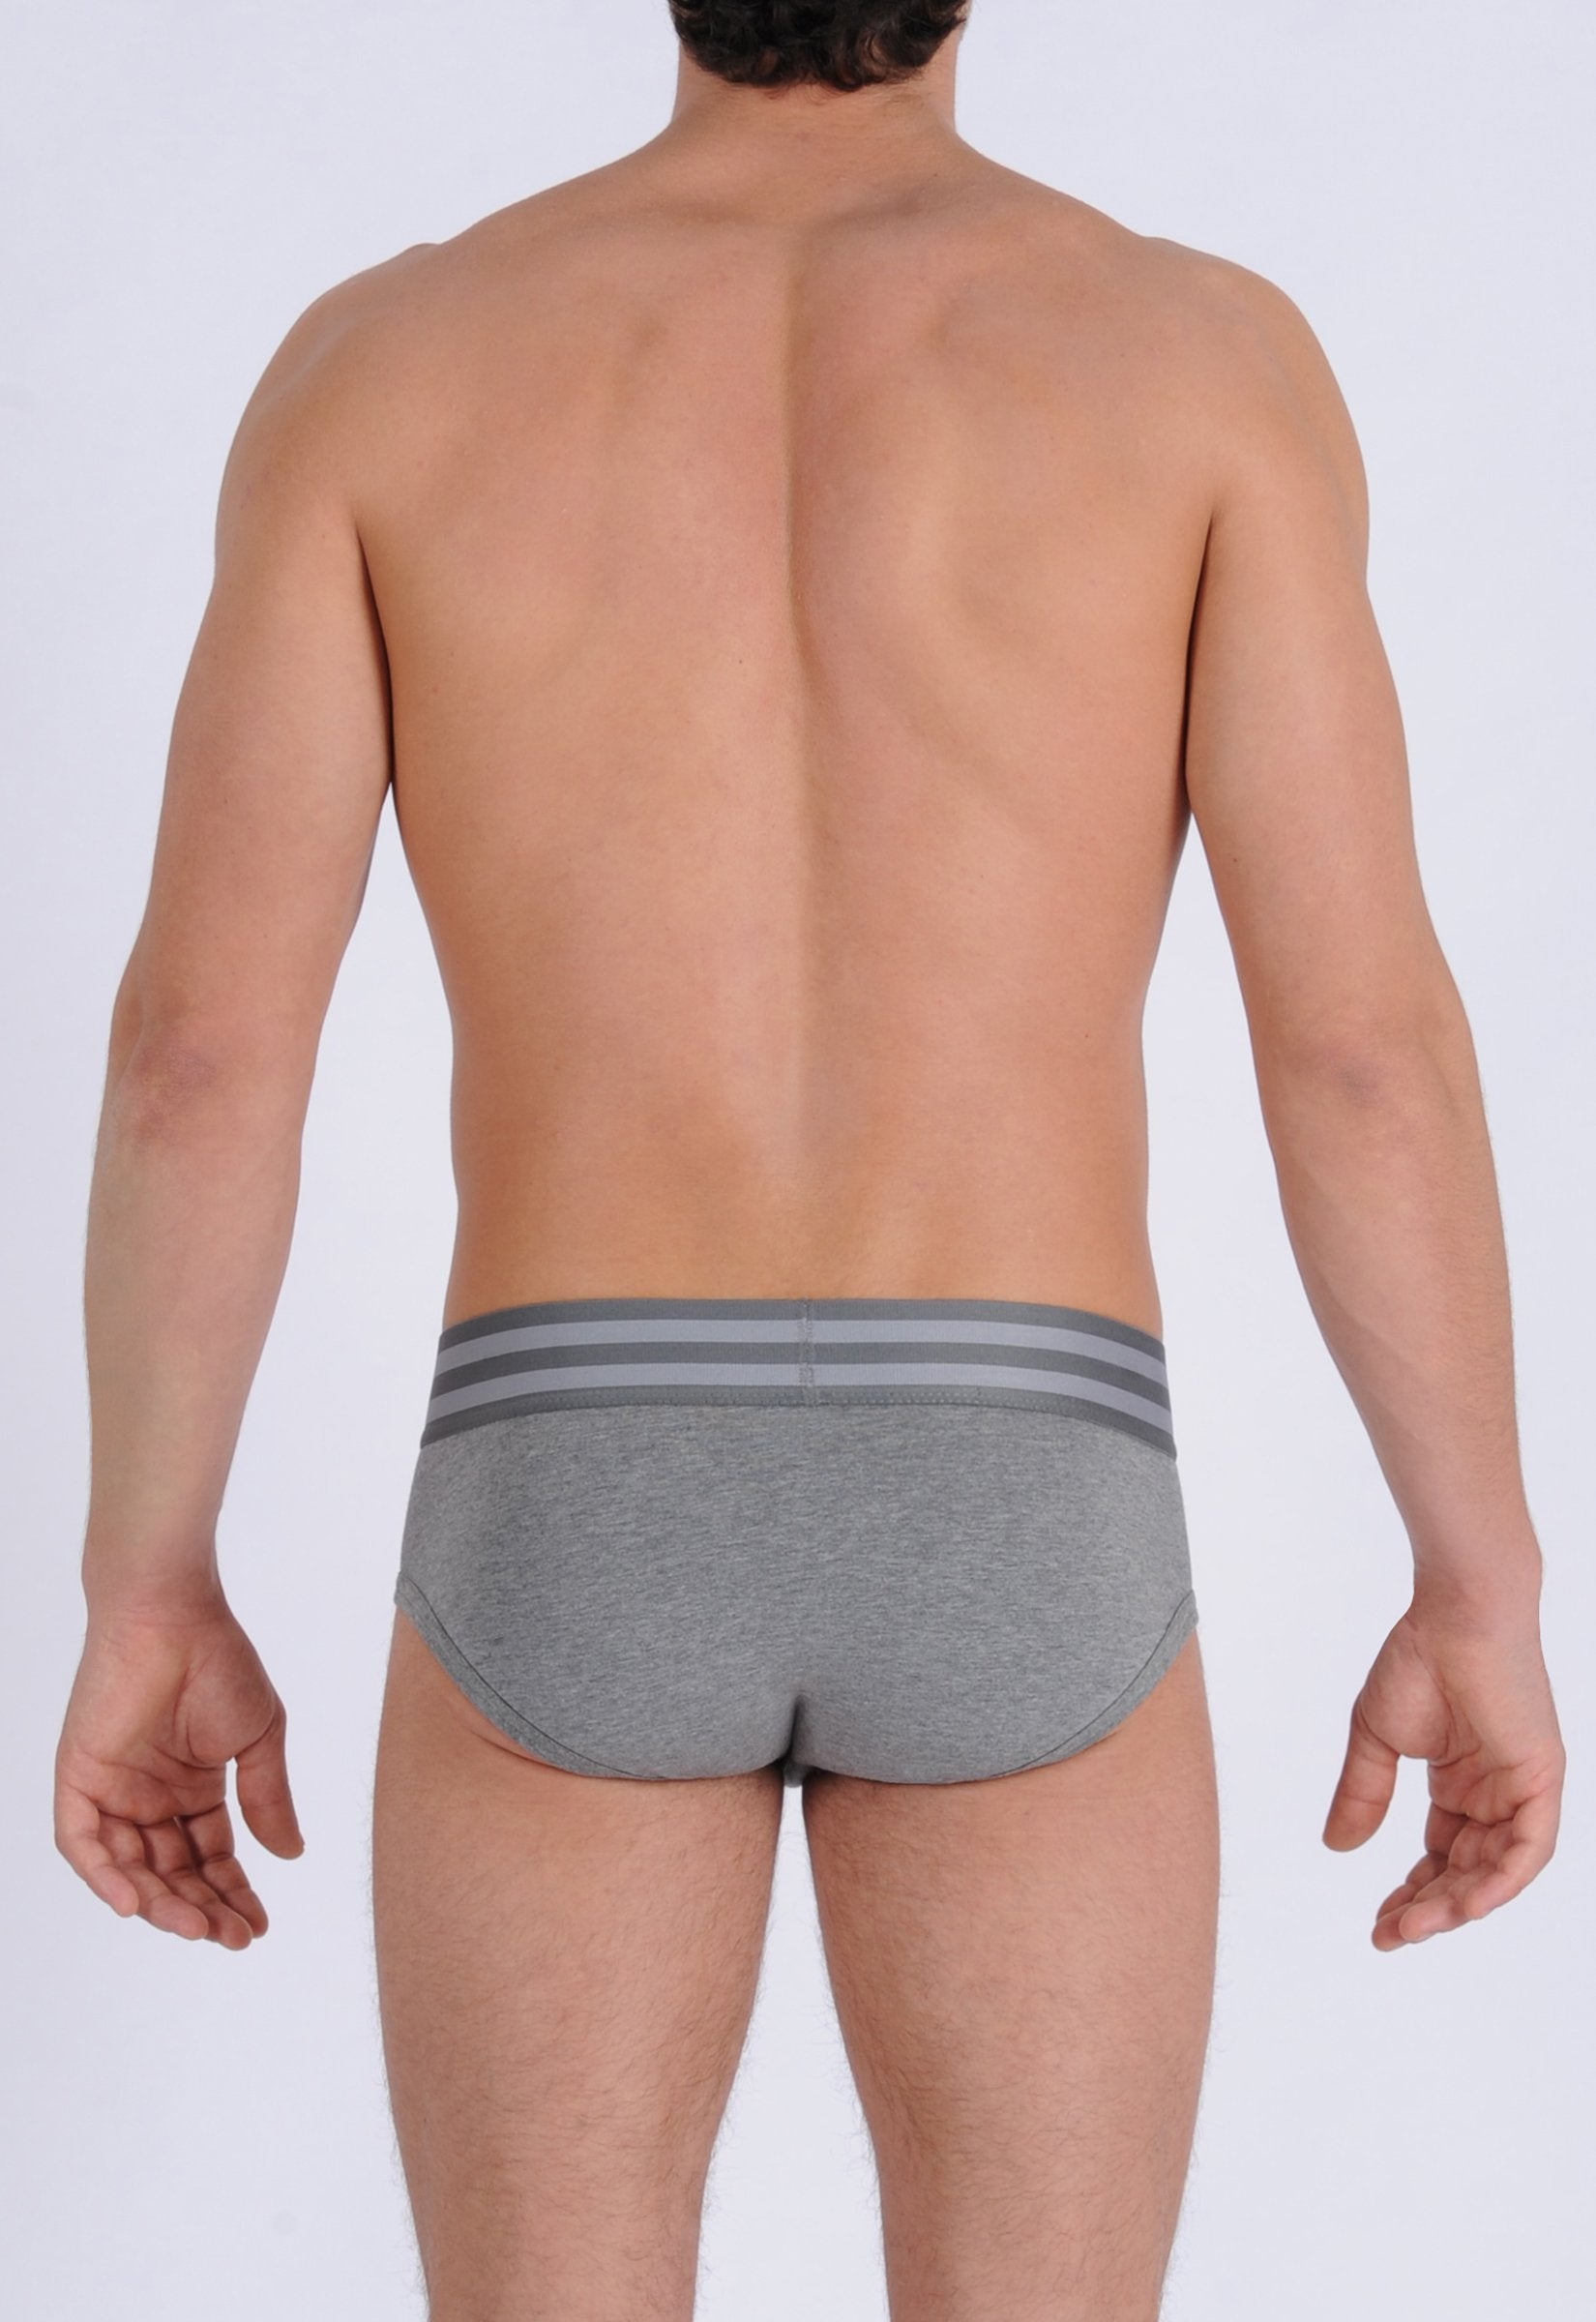 Ginch Gonch Men's Signature Series Underwear - Low Rise Brief grey printed thick waistband back